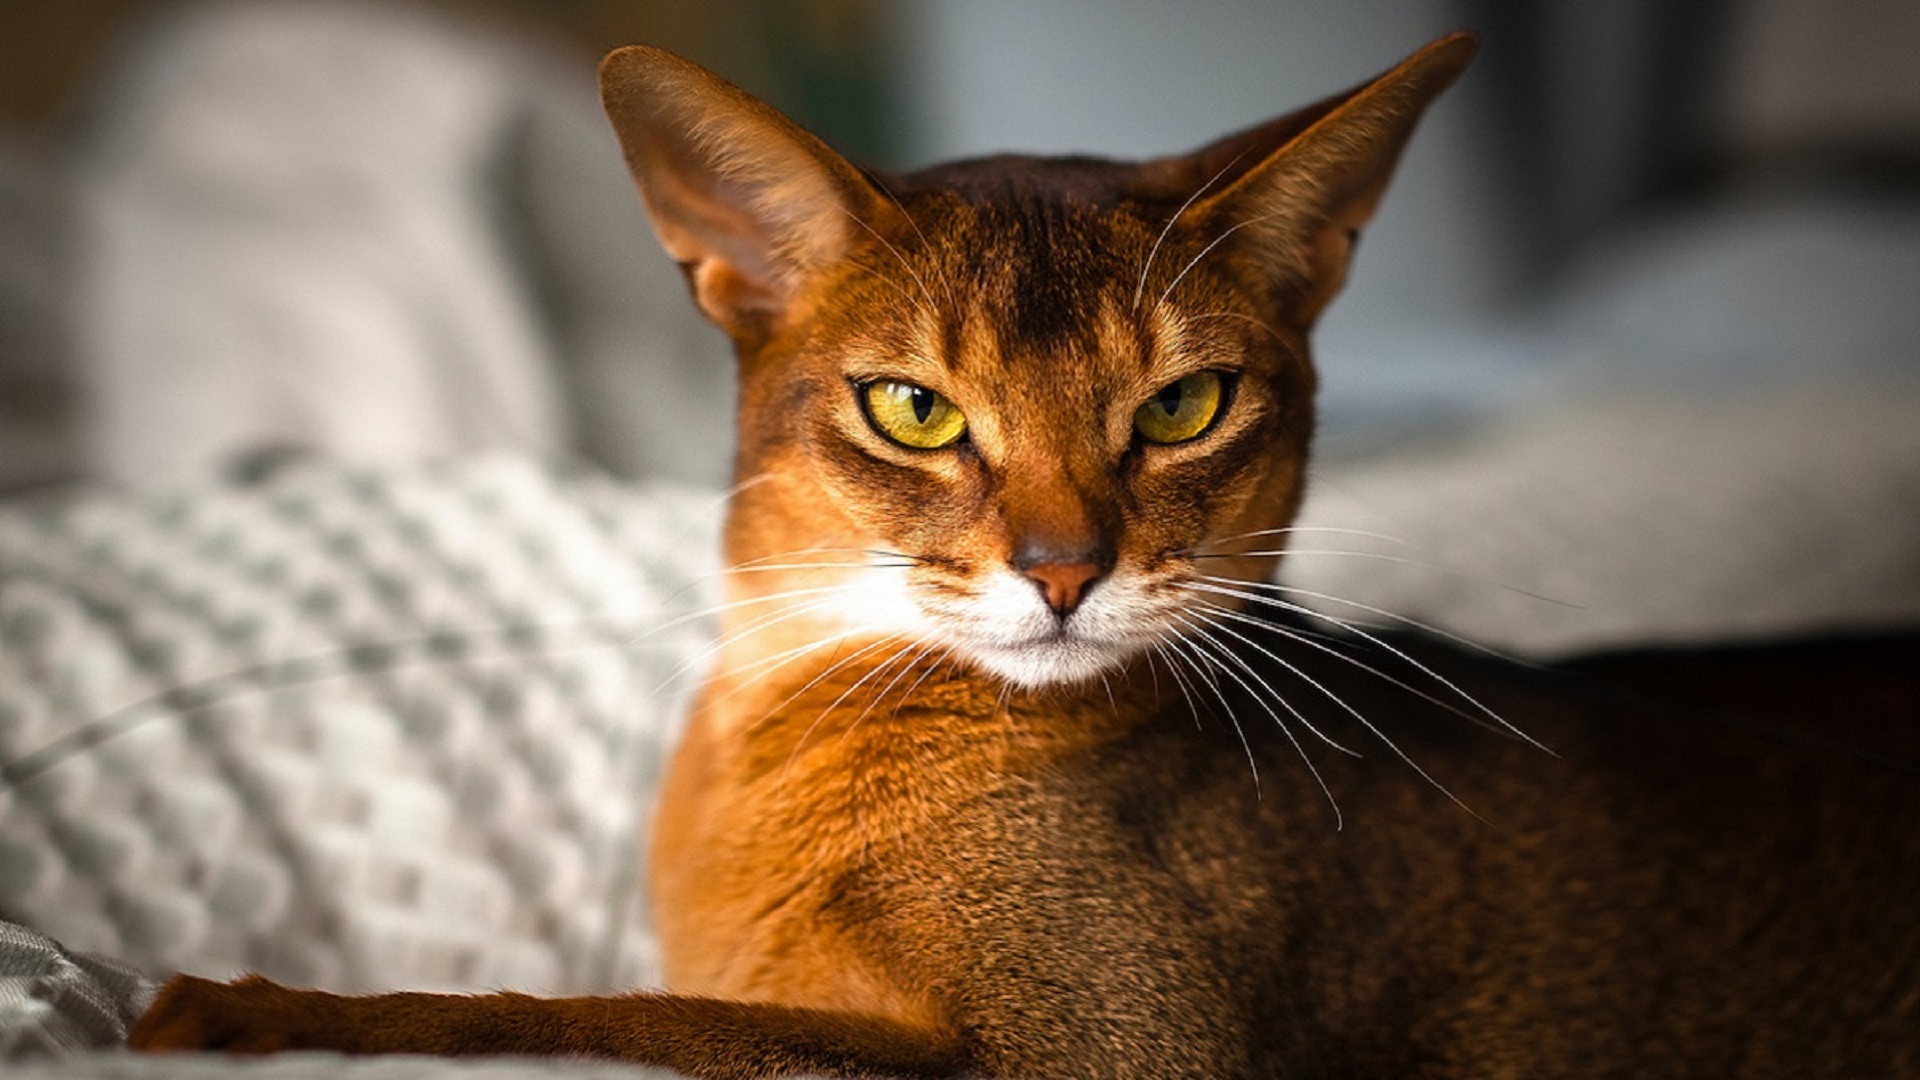 Abyssinian cat with reddish fur and yellow eyes